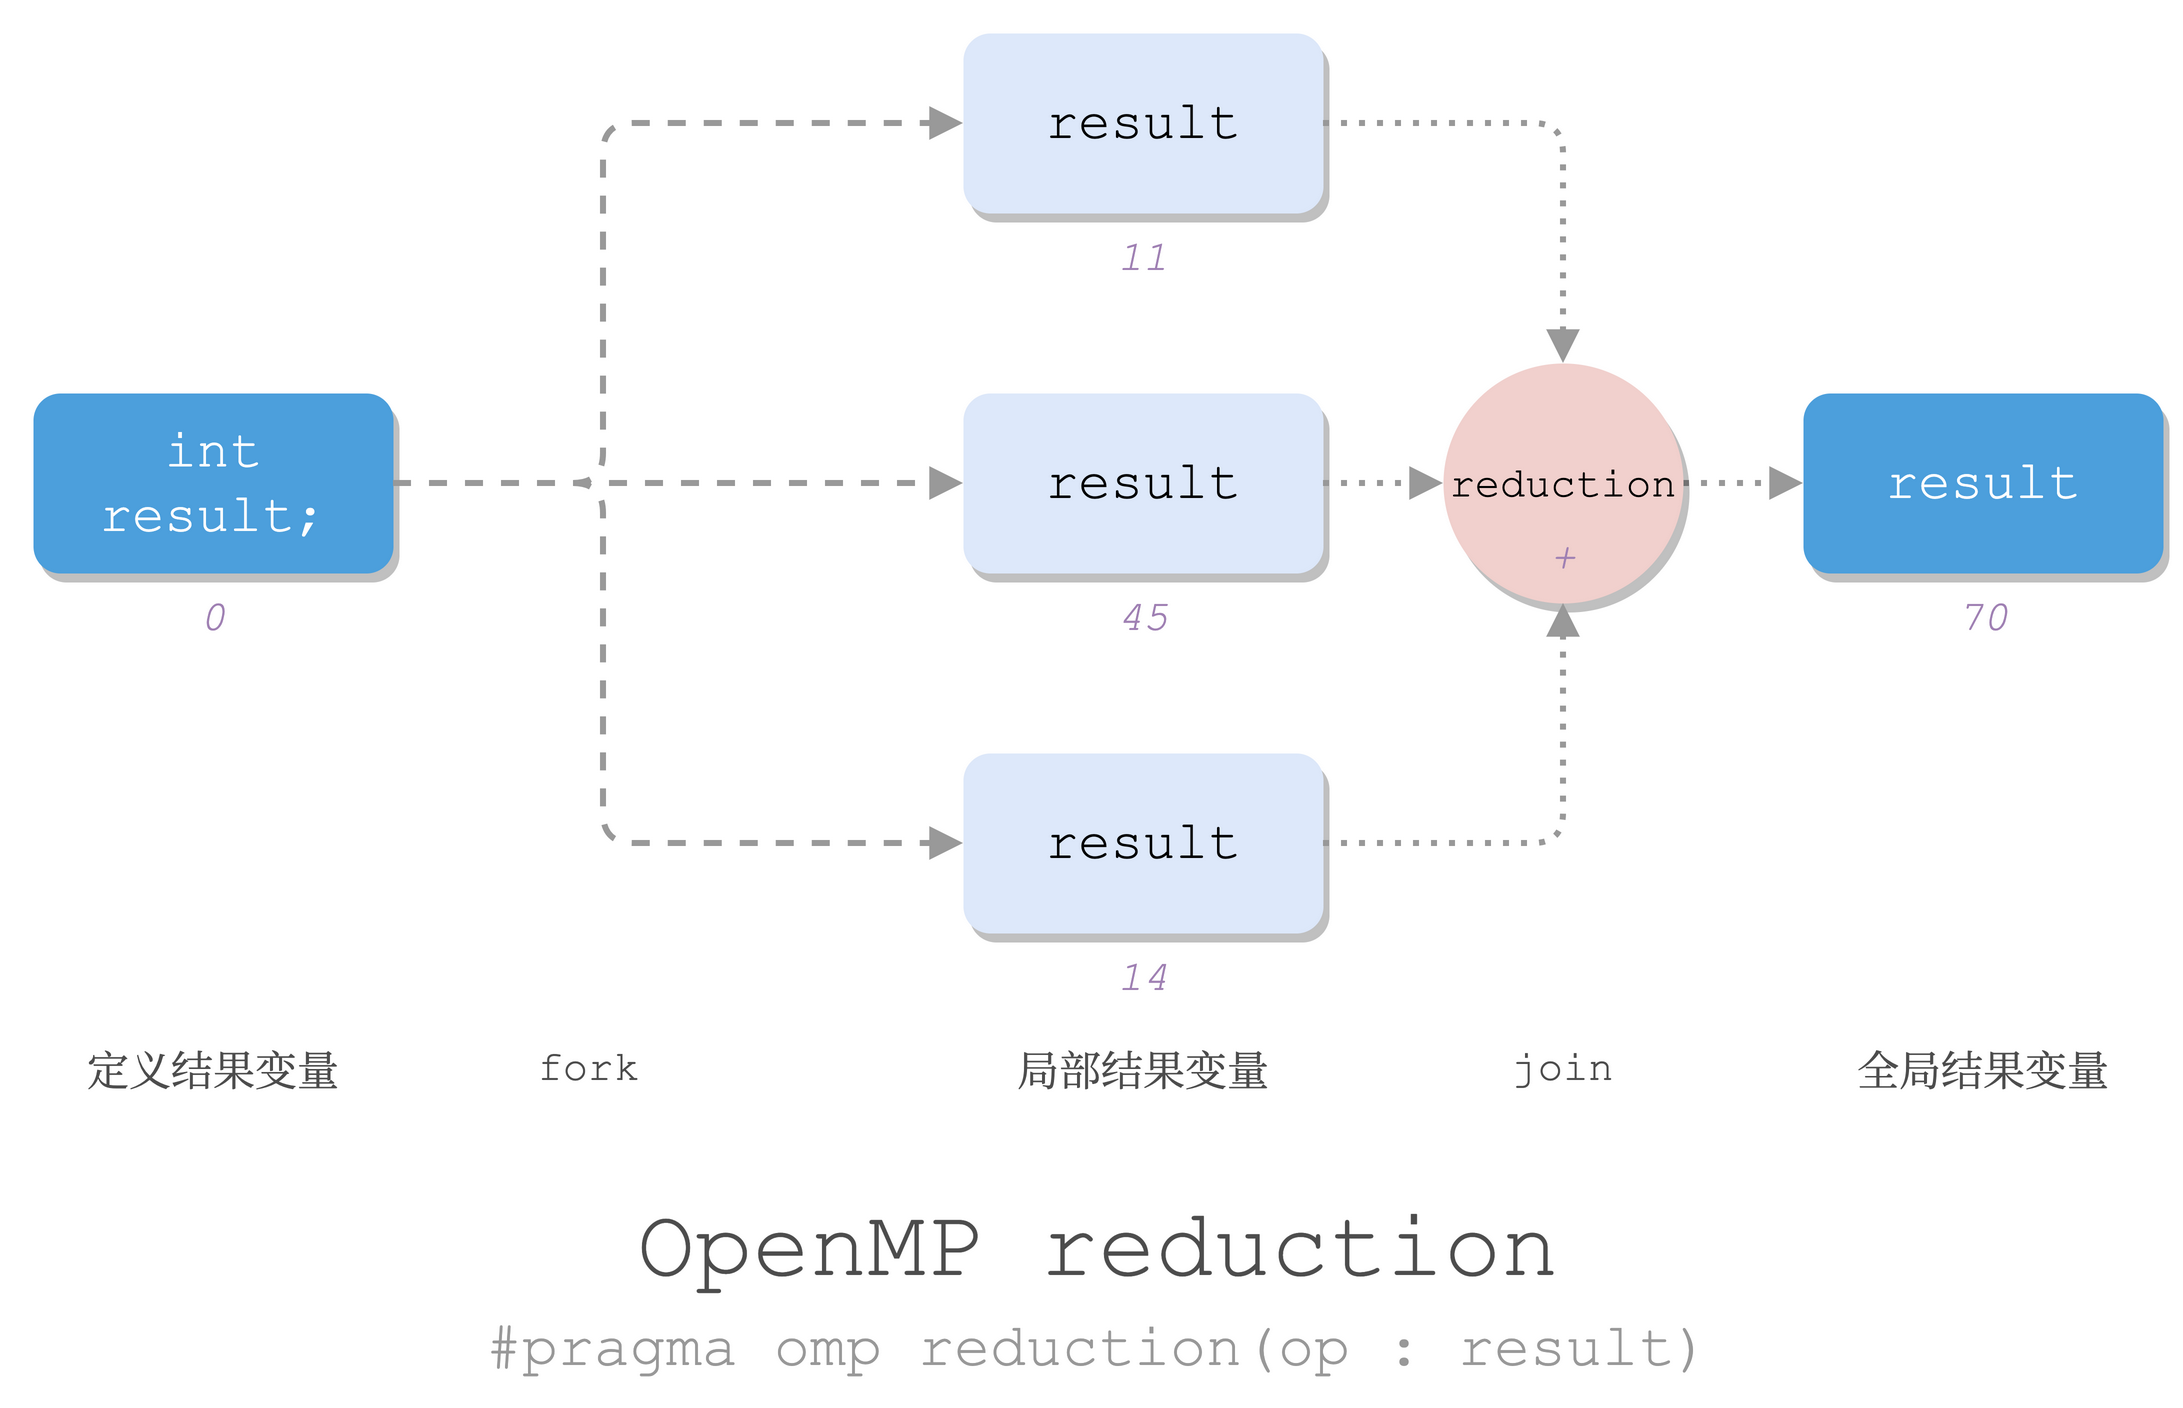 OpenMP reduction